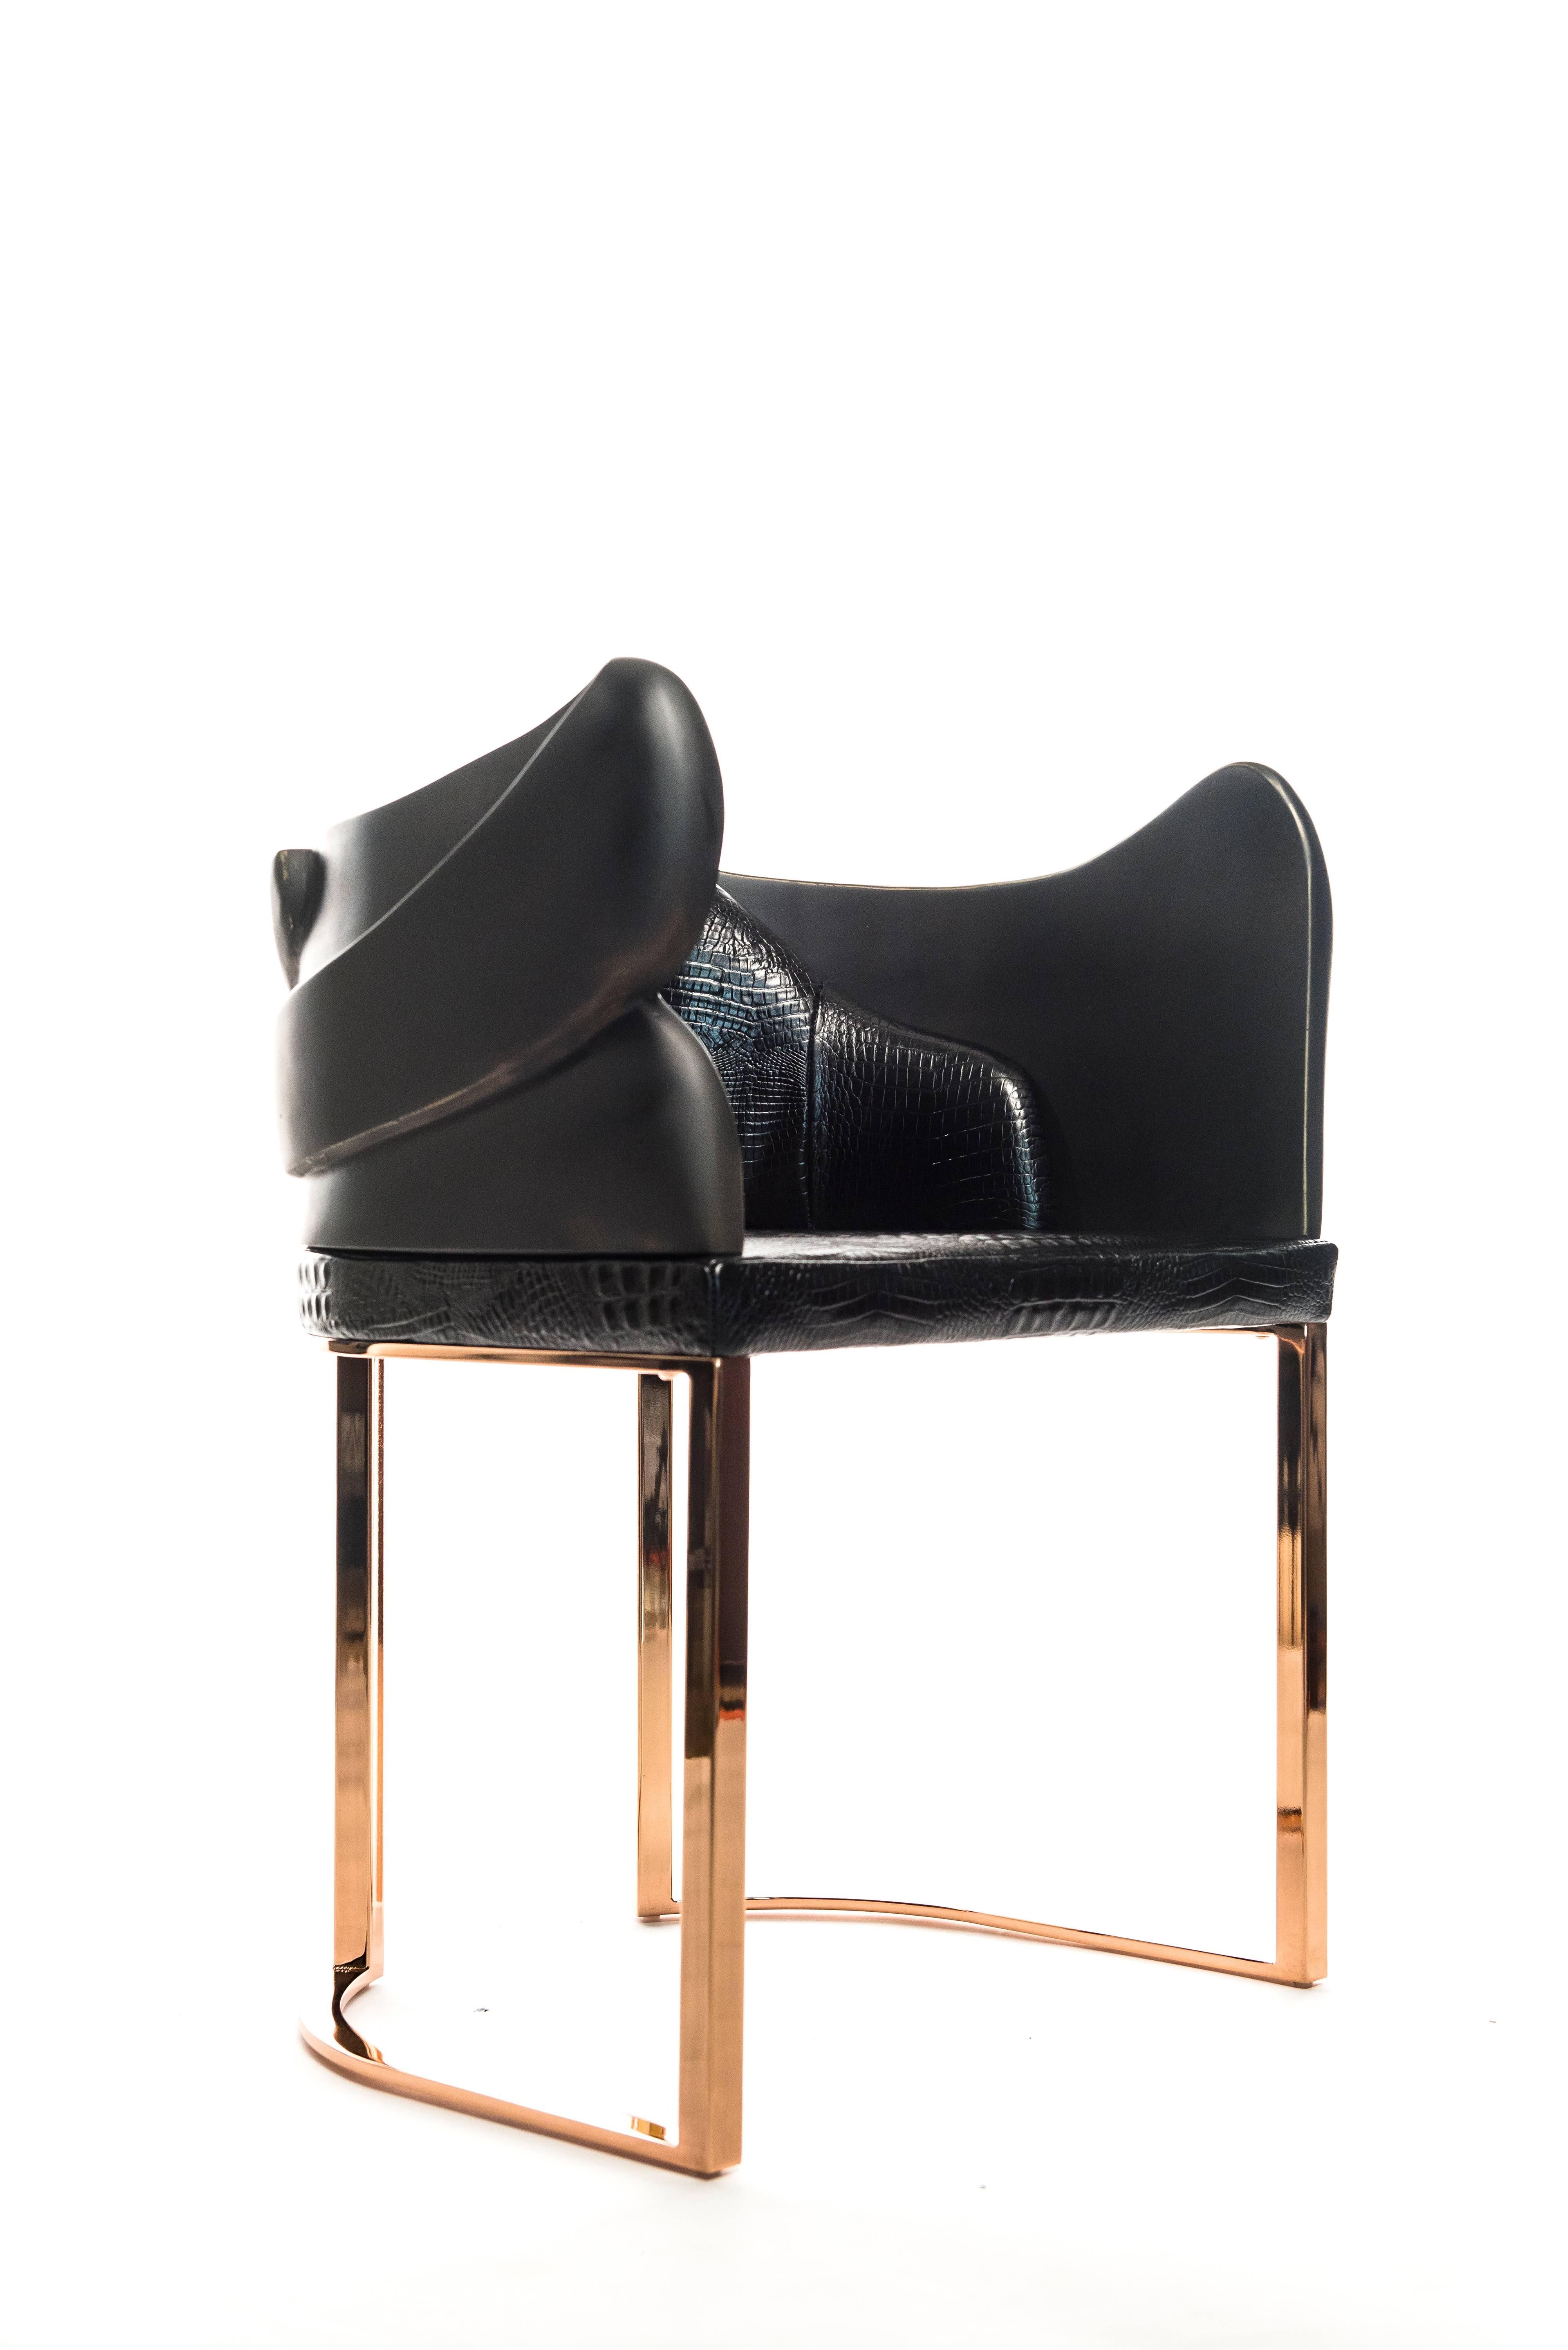 Gulla Jónsdóttir
Cuff Chair
Rose gold, bronze, embossed crocodile leather
24 x 22 x 38.5 in
Seat height 18.5 in
Edition of 12

Icelandic-born Gulla Jónsdóttir creates unexpected and poetic modern bespoke furniture pieces inspired by her Nordic